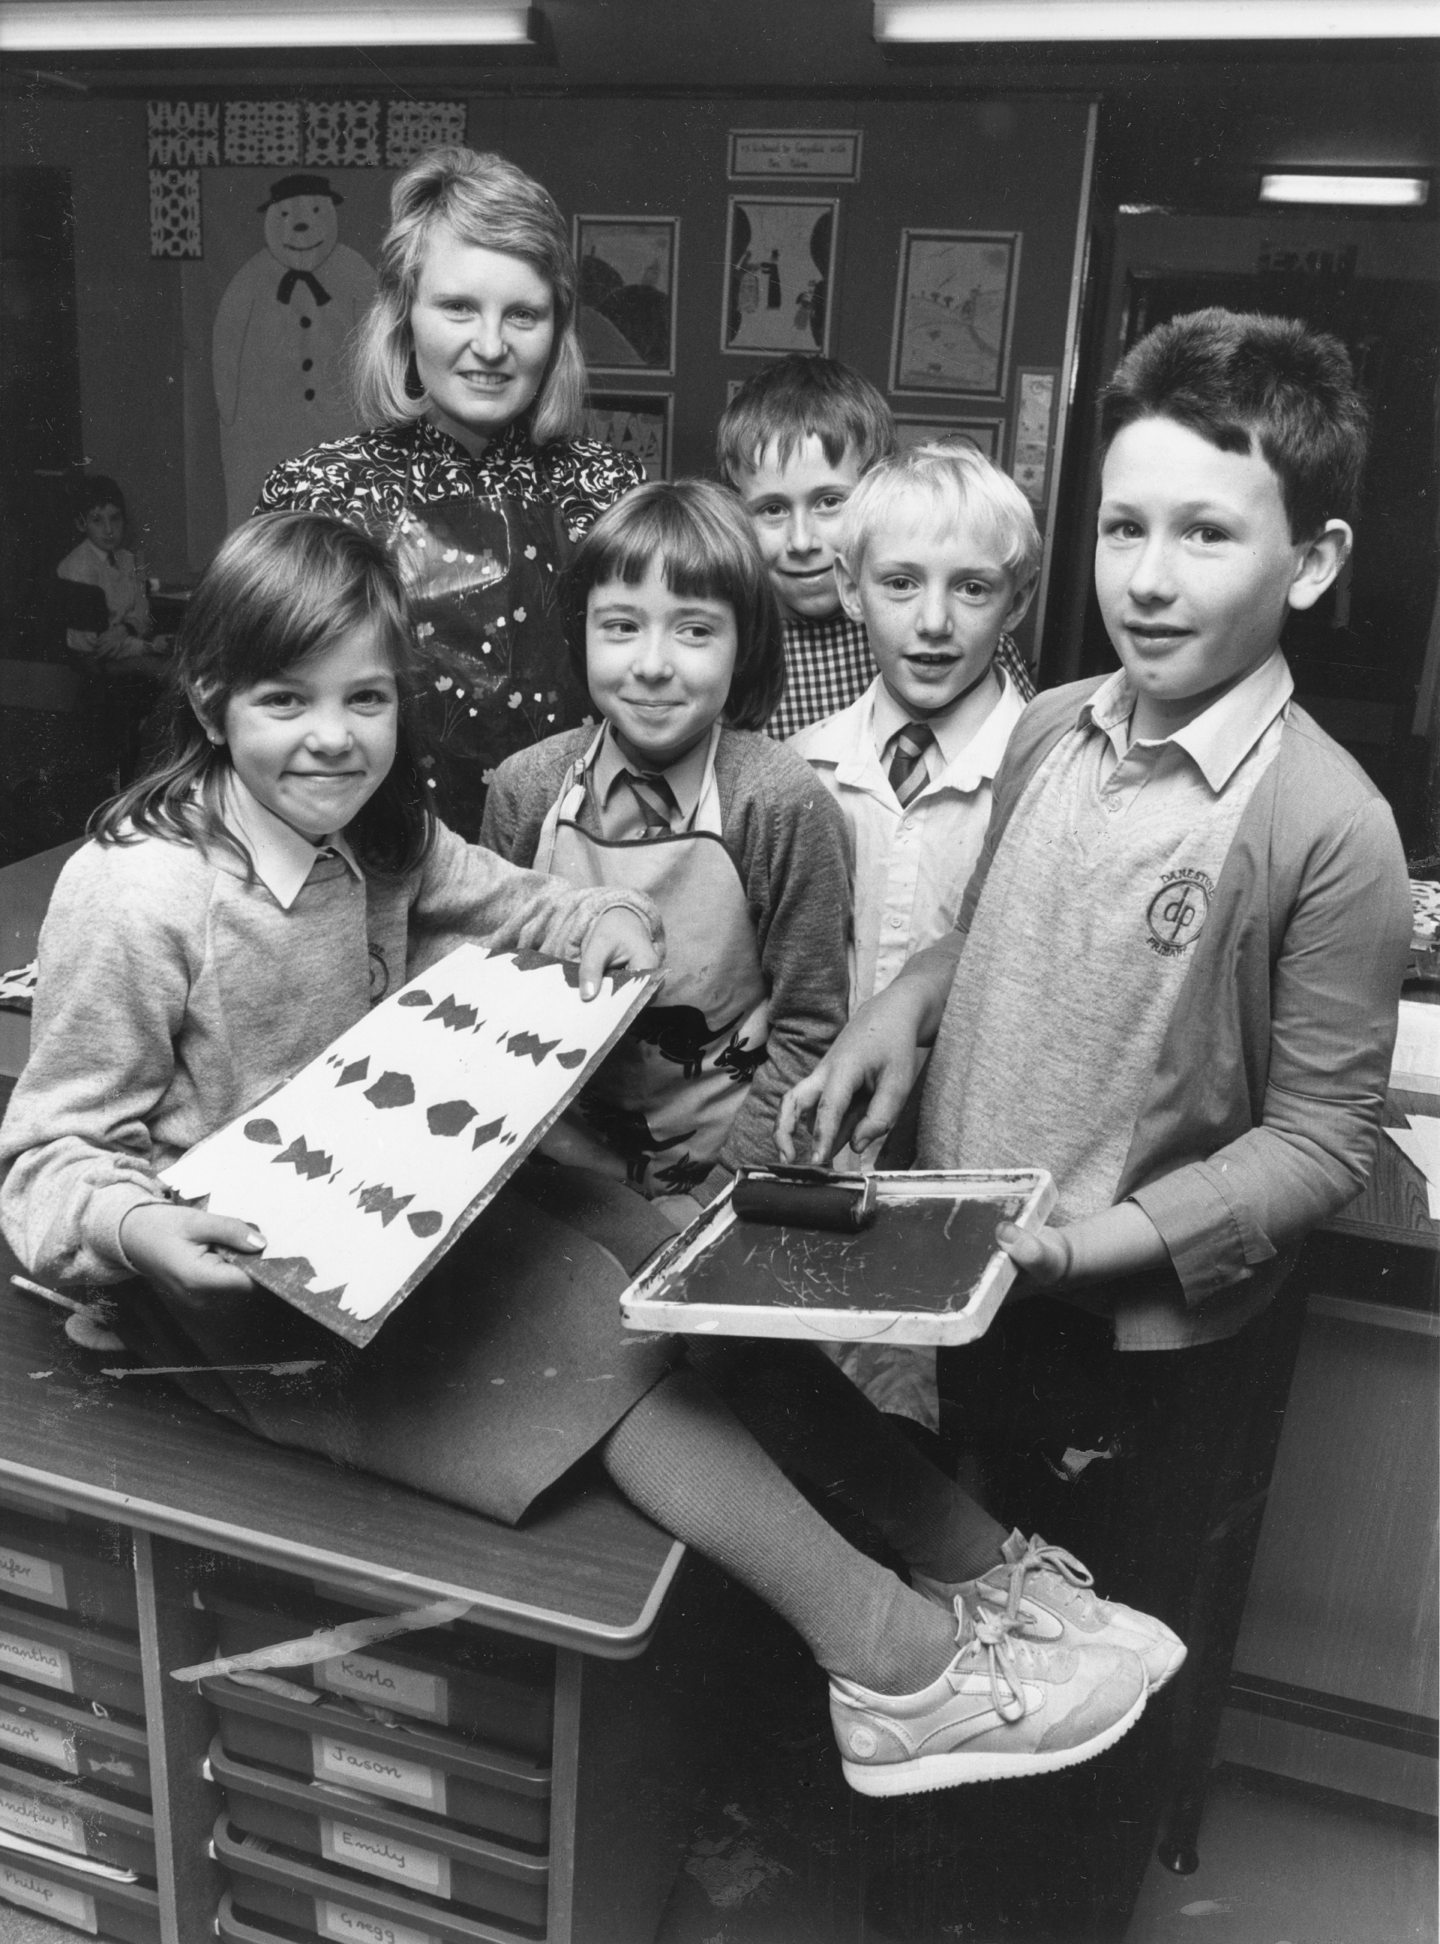 Danestone Primary teacher Christine Wilson with a group of pupils showing off handmade Christmas decorations in 1987.